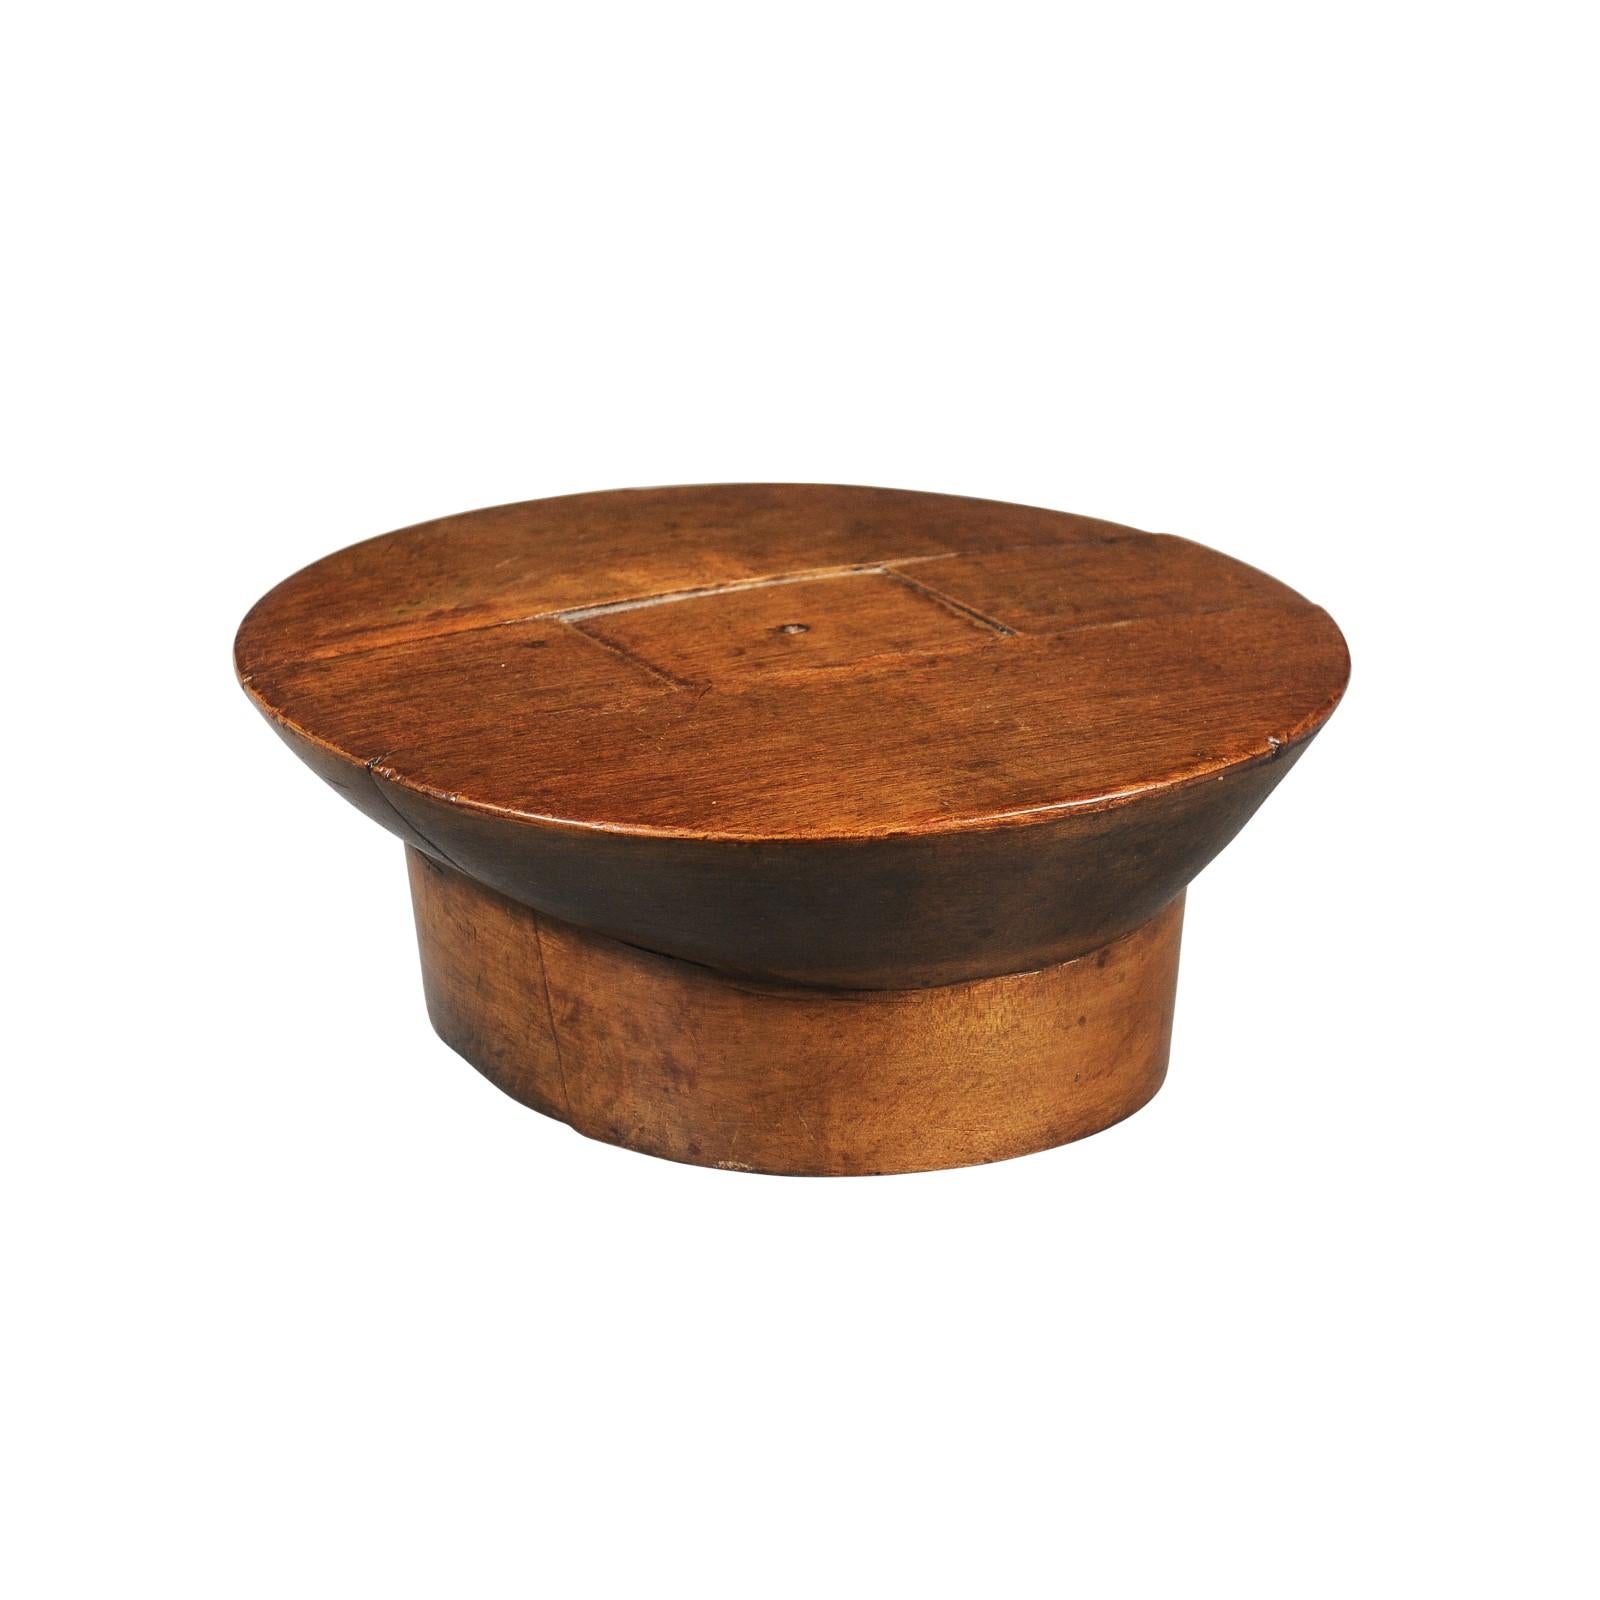 An English wooden Milliner's hat mold form from the early 20th century, with nice patina. Created in England at the very end of Queen Victoria's reign, this wooden hat mold will make for a lovely decorative addition to any home! Perfect to style a